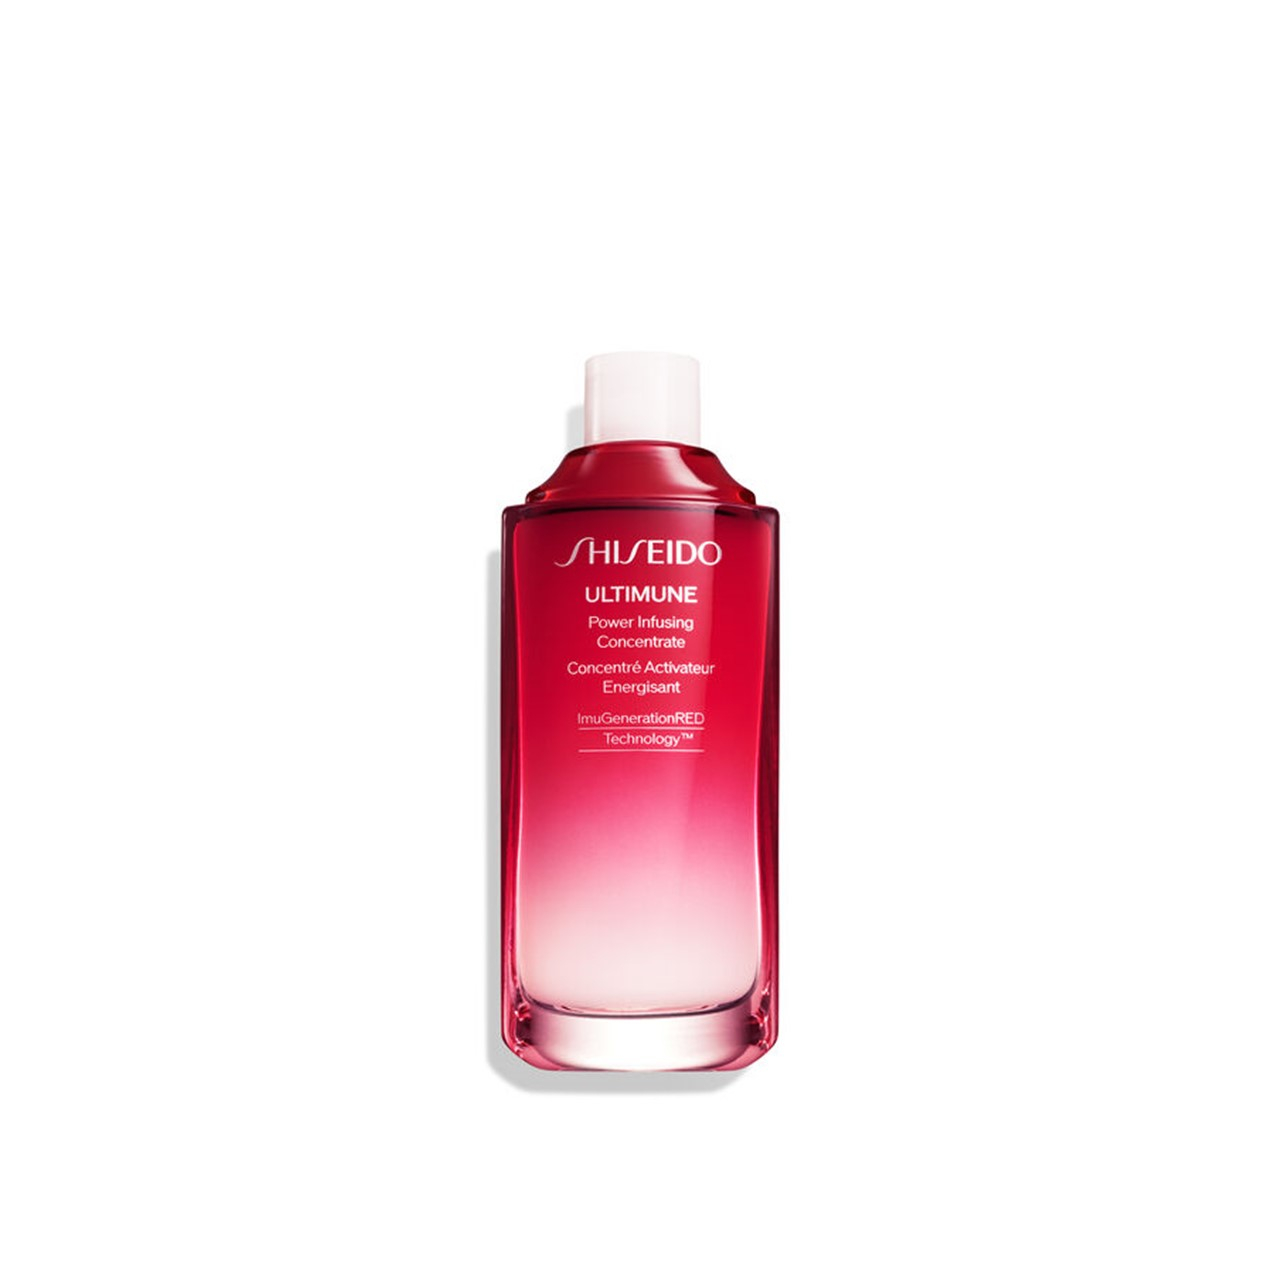 Shiseido Ultimune Power Infusing Concentrate Serum Refill 75ml